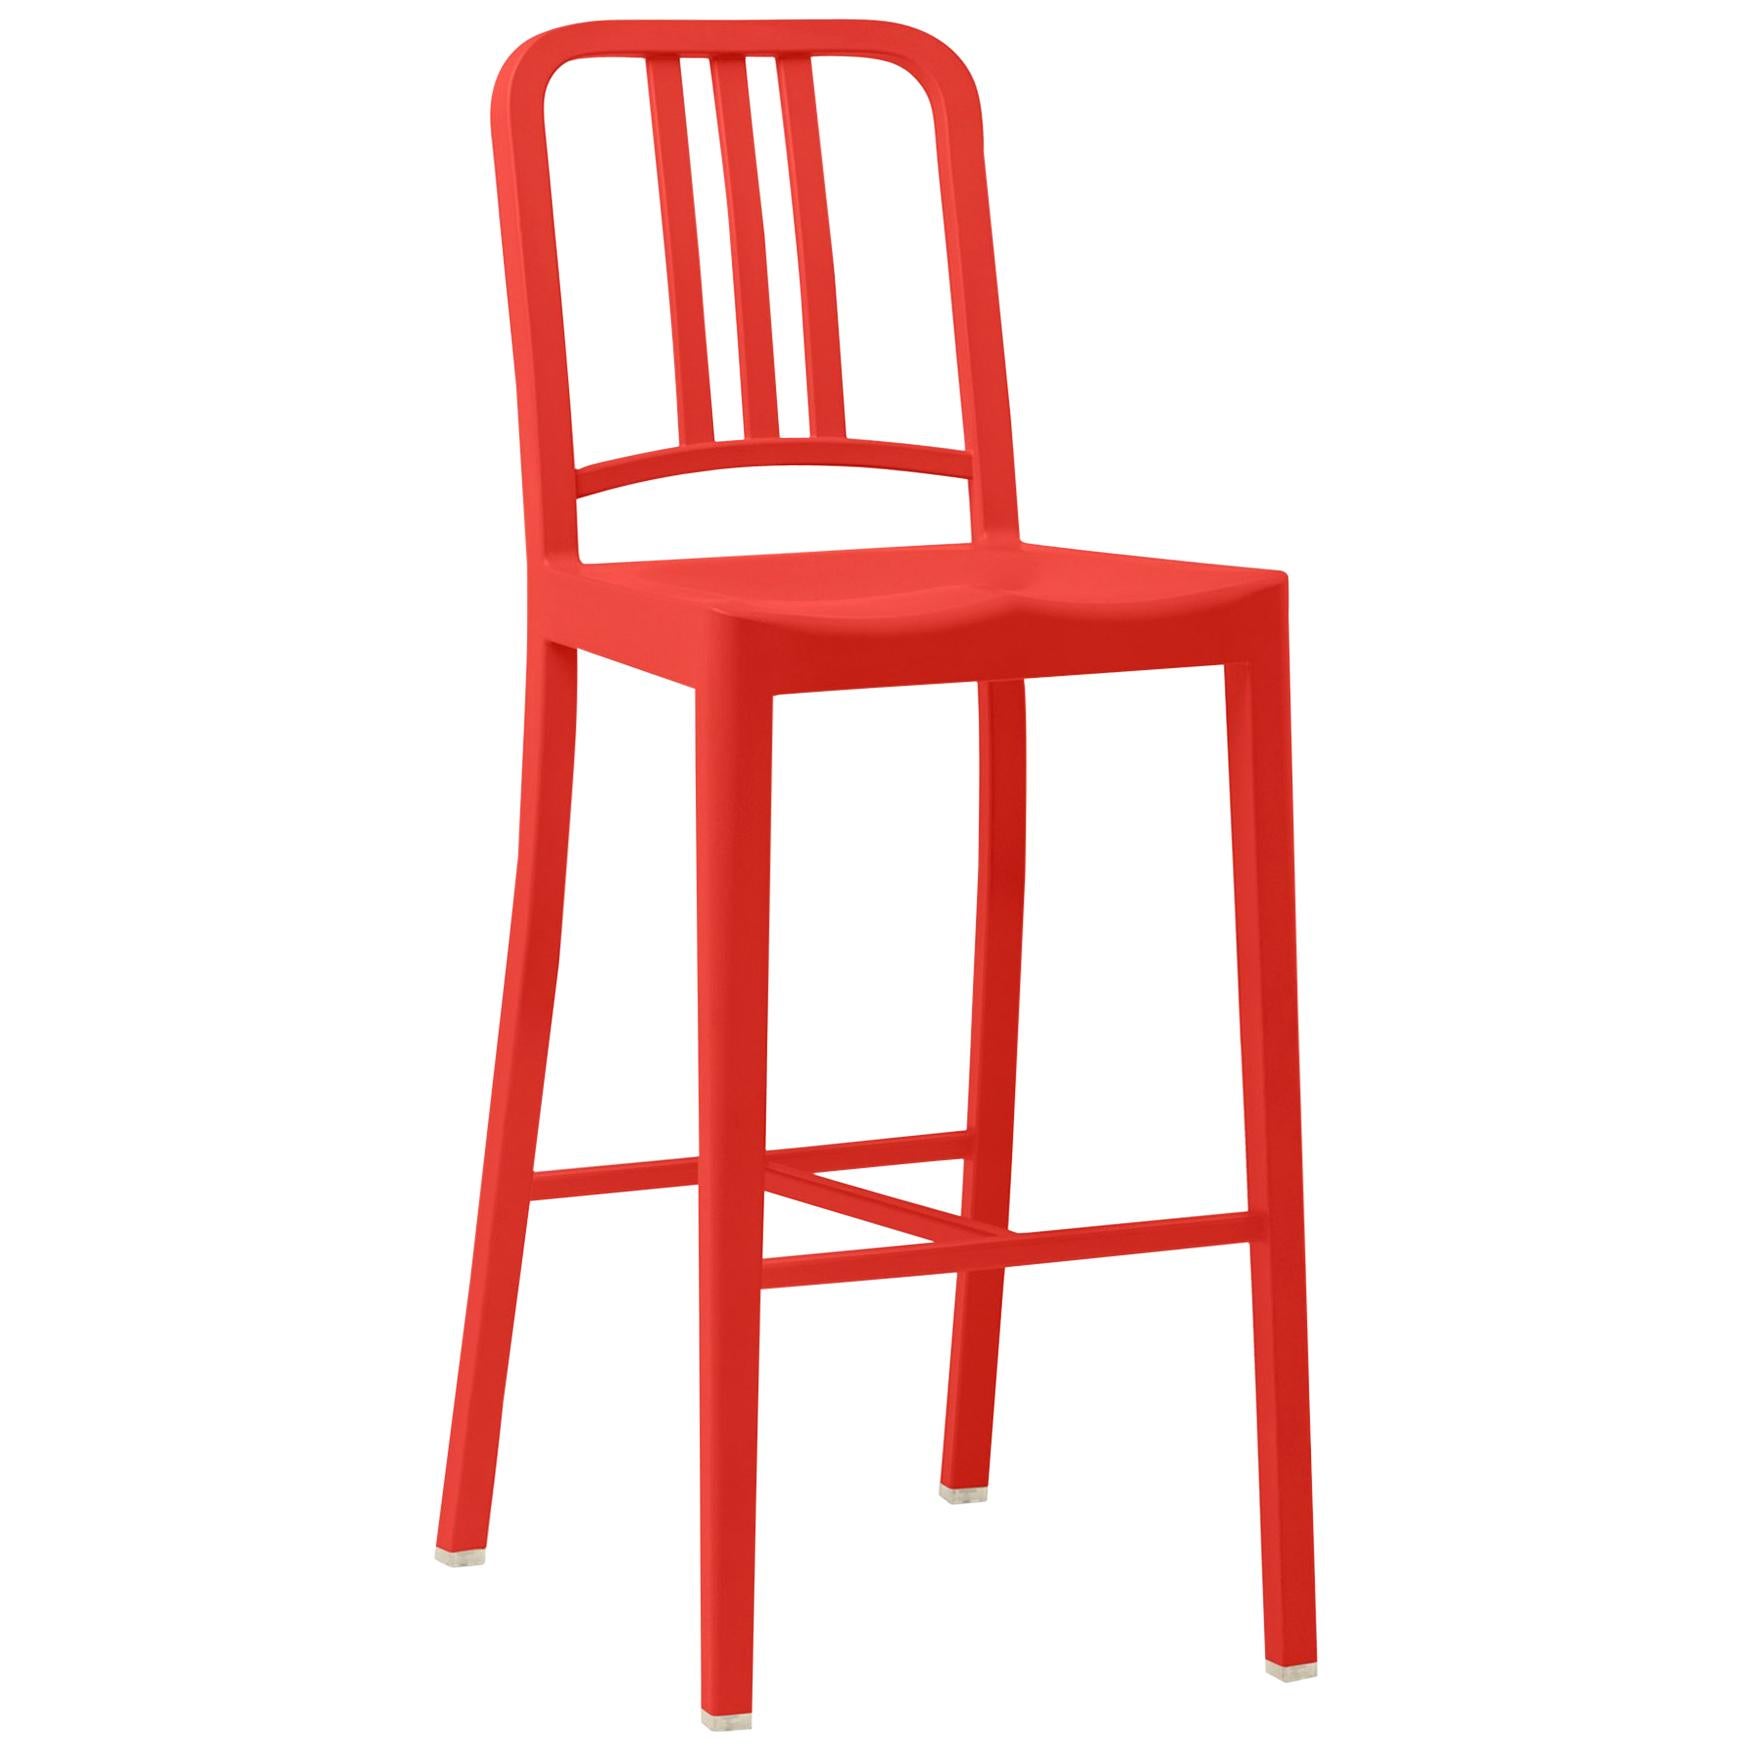 Emeco 111 Navy Barstool in Red by Coca-Cola For Sale